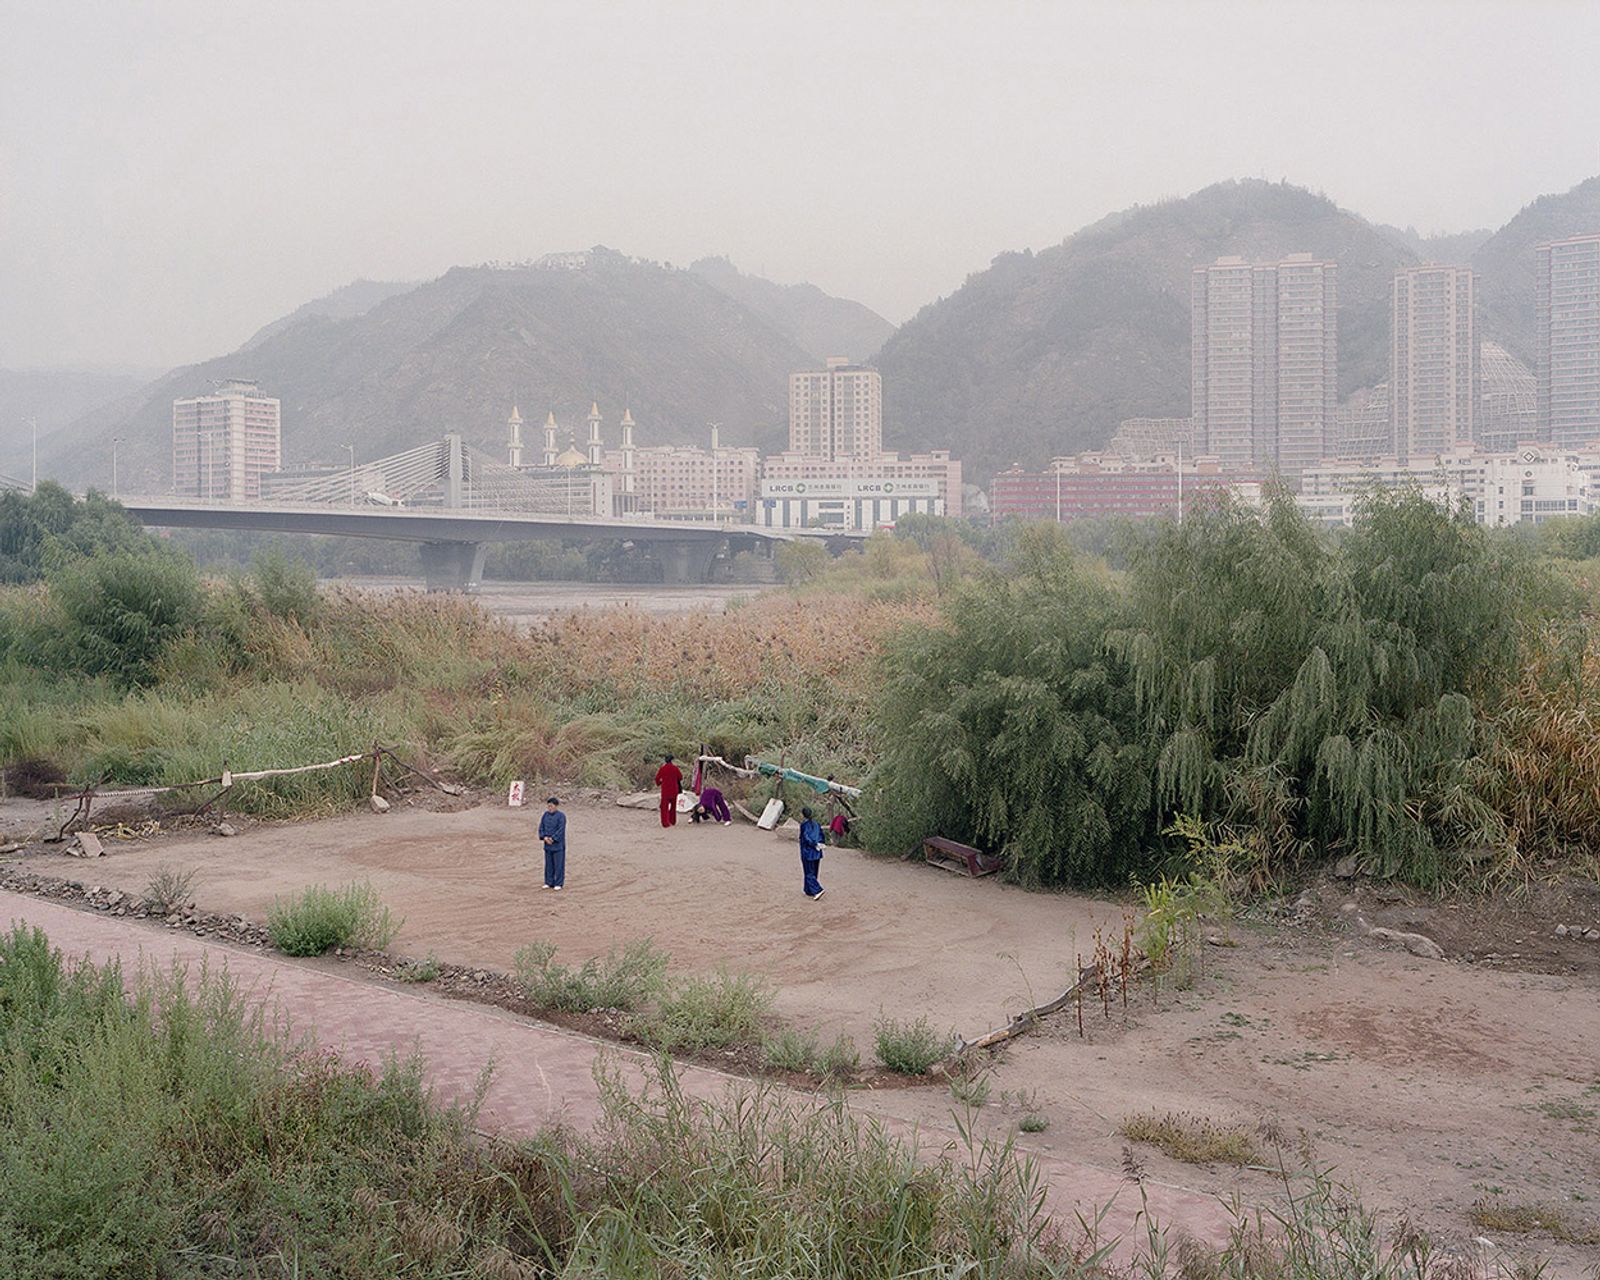 © Sebastien Tixier - Image from the SHAN SHUI photography project